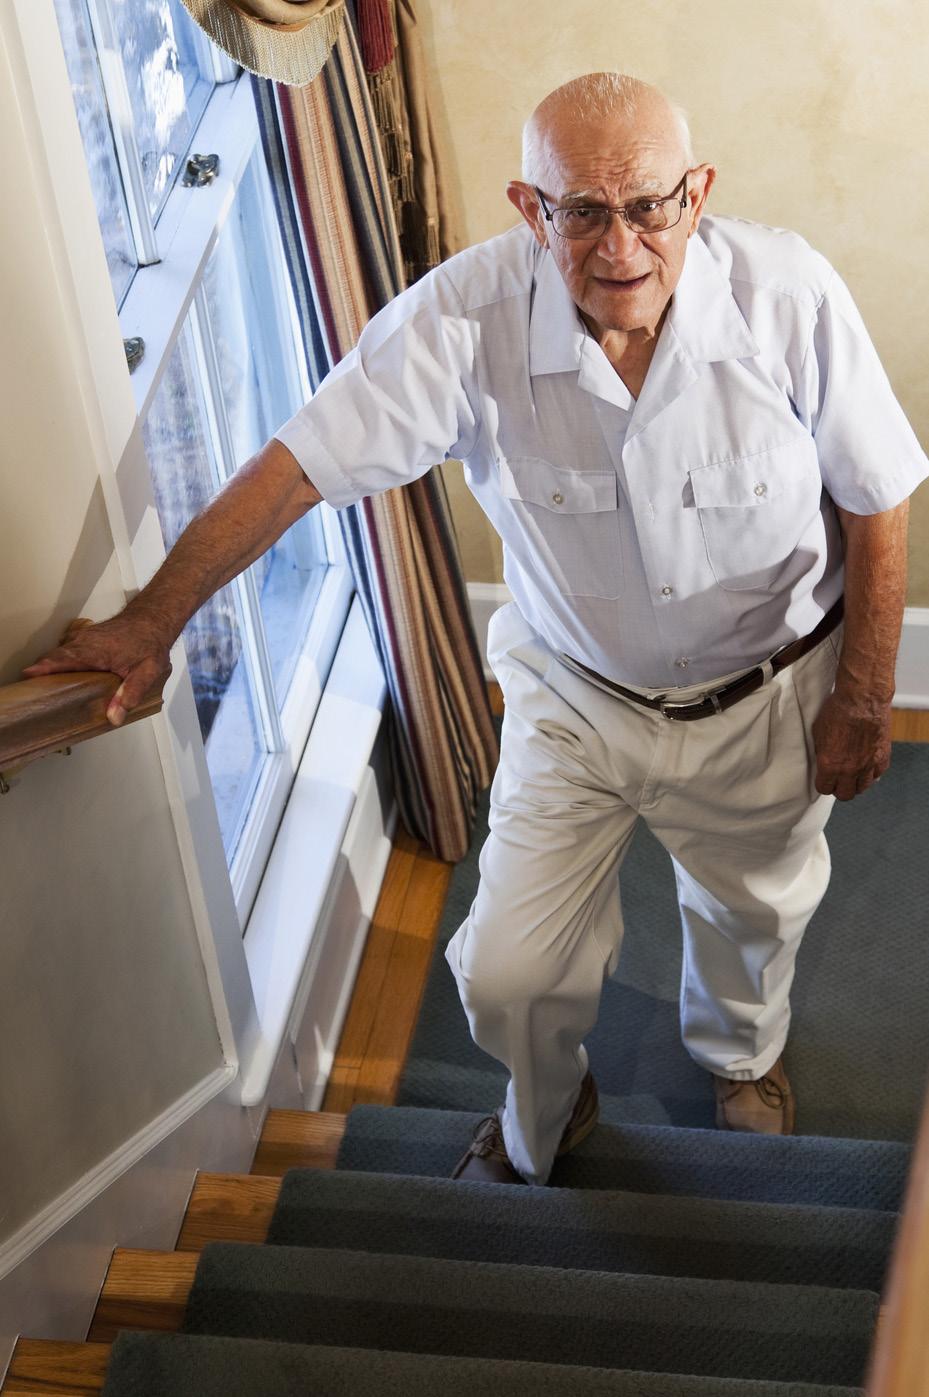 How to prevent falls at home Make Your Home Safe About half of all falls happen at home, but the hazards that cause them are easy to spot and fix. 1. Clear your walkways and stairs.